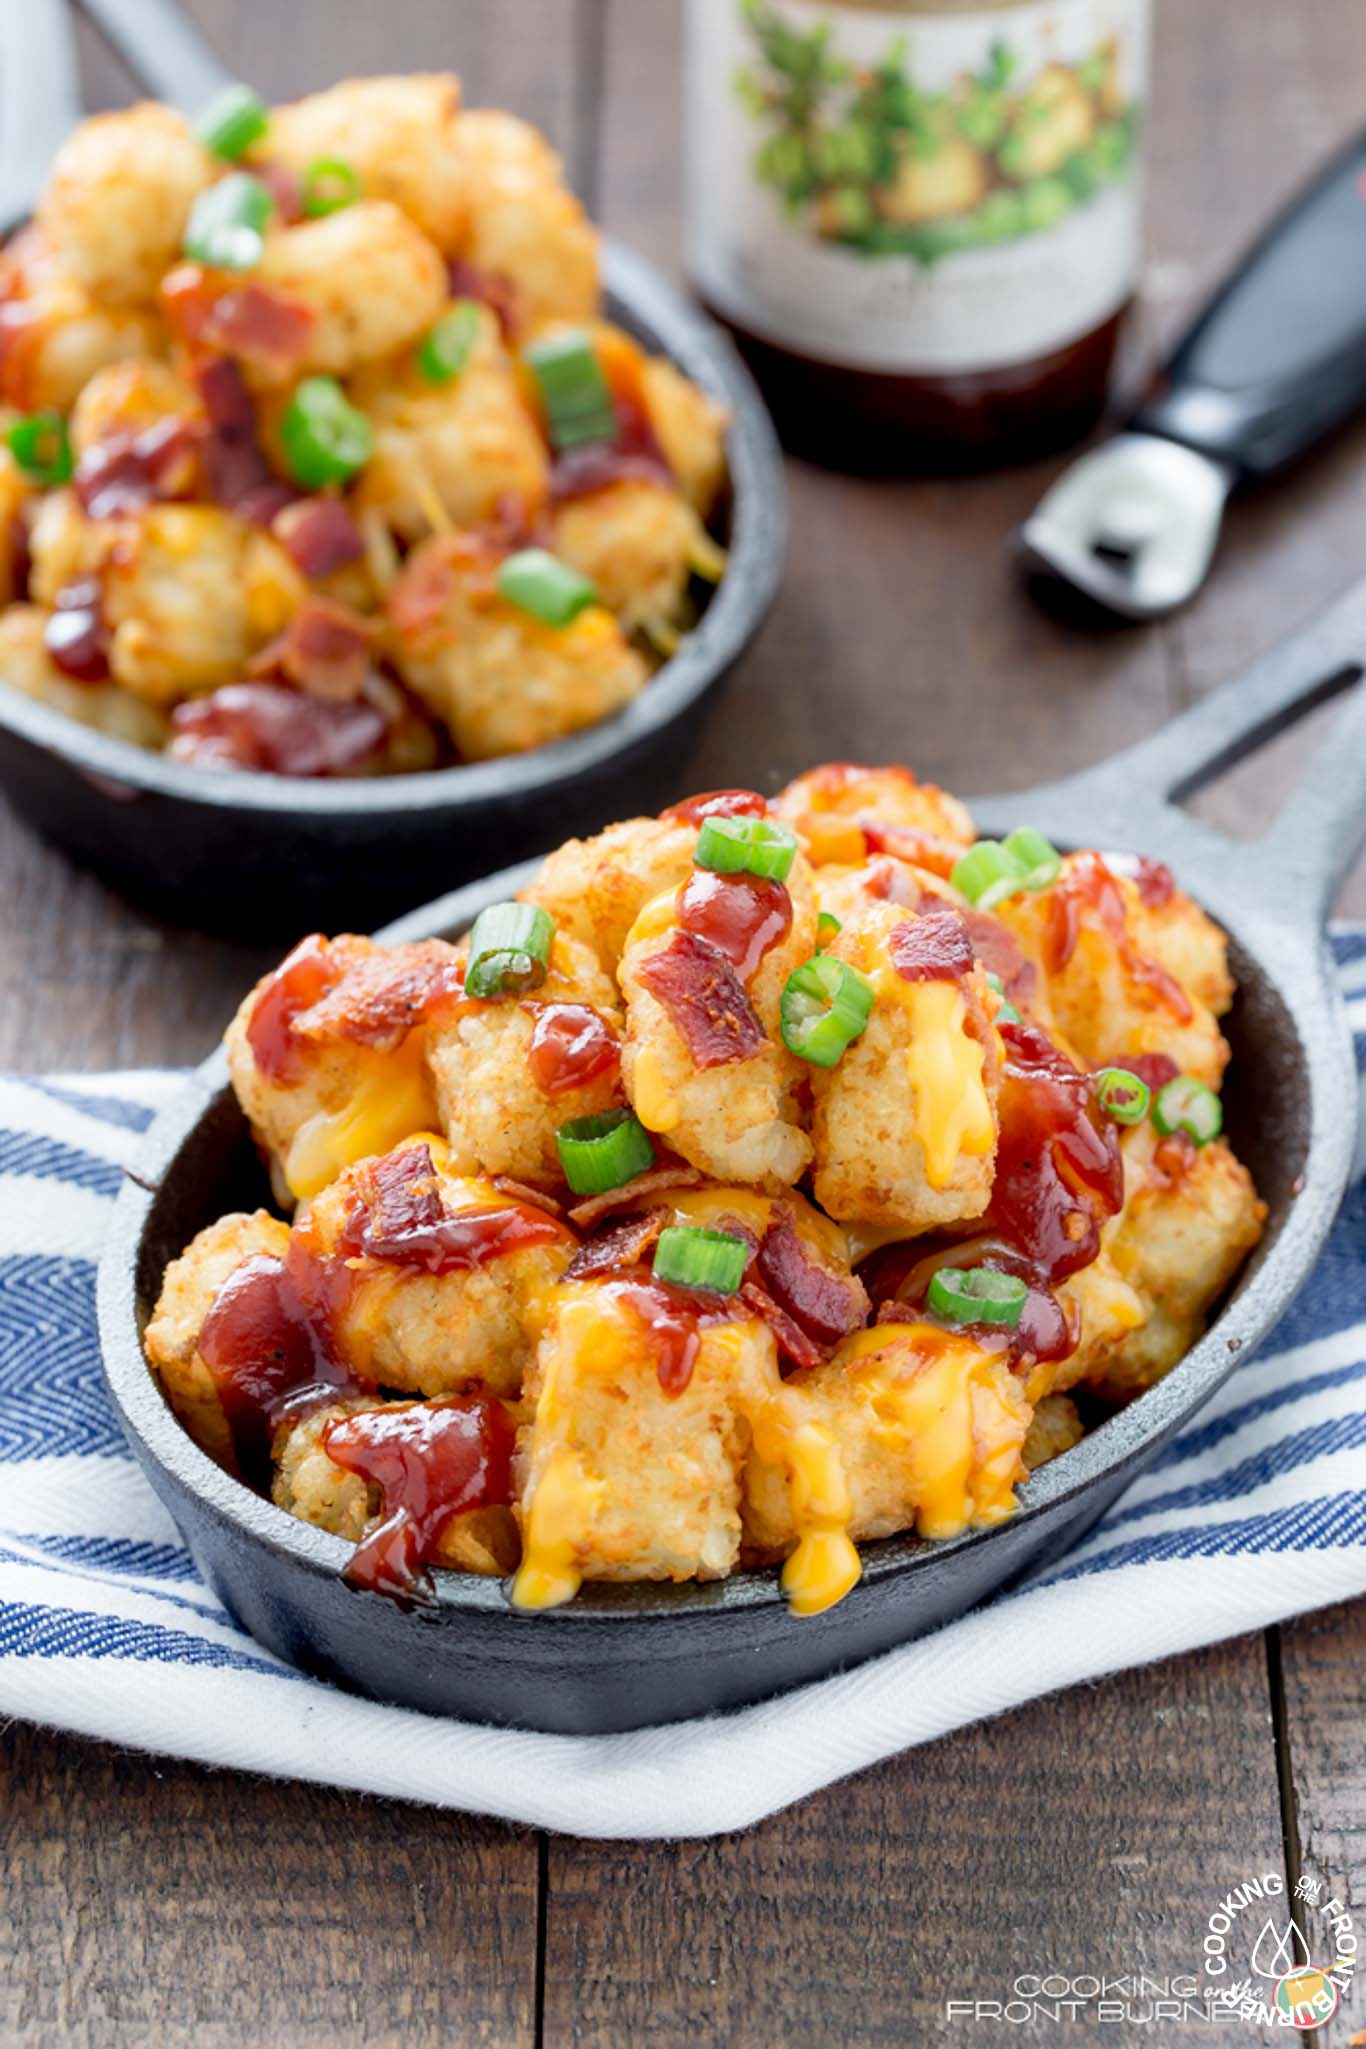 https://www.cookingonthefrontburners.com/wp-content/uploads/2019/02/BBQ-Bacon-Cheesy-Totchos.jpg